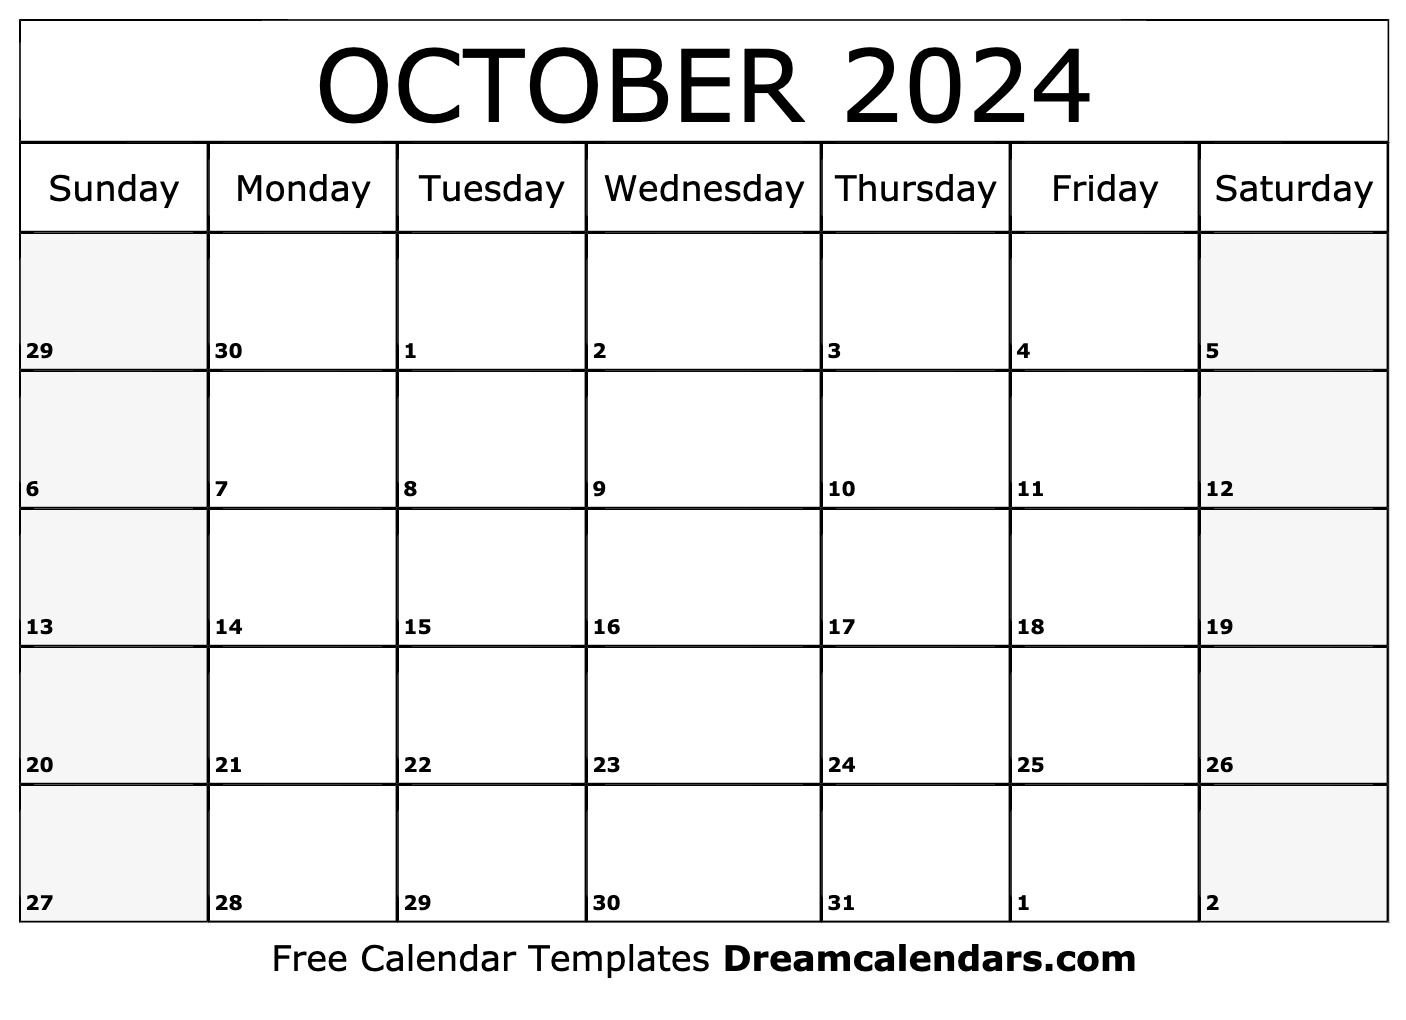 October 2024 Calendar | Free Blank Printable With Holidays for Free Printable October 2024 Calendar With Holidays